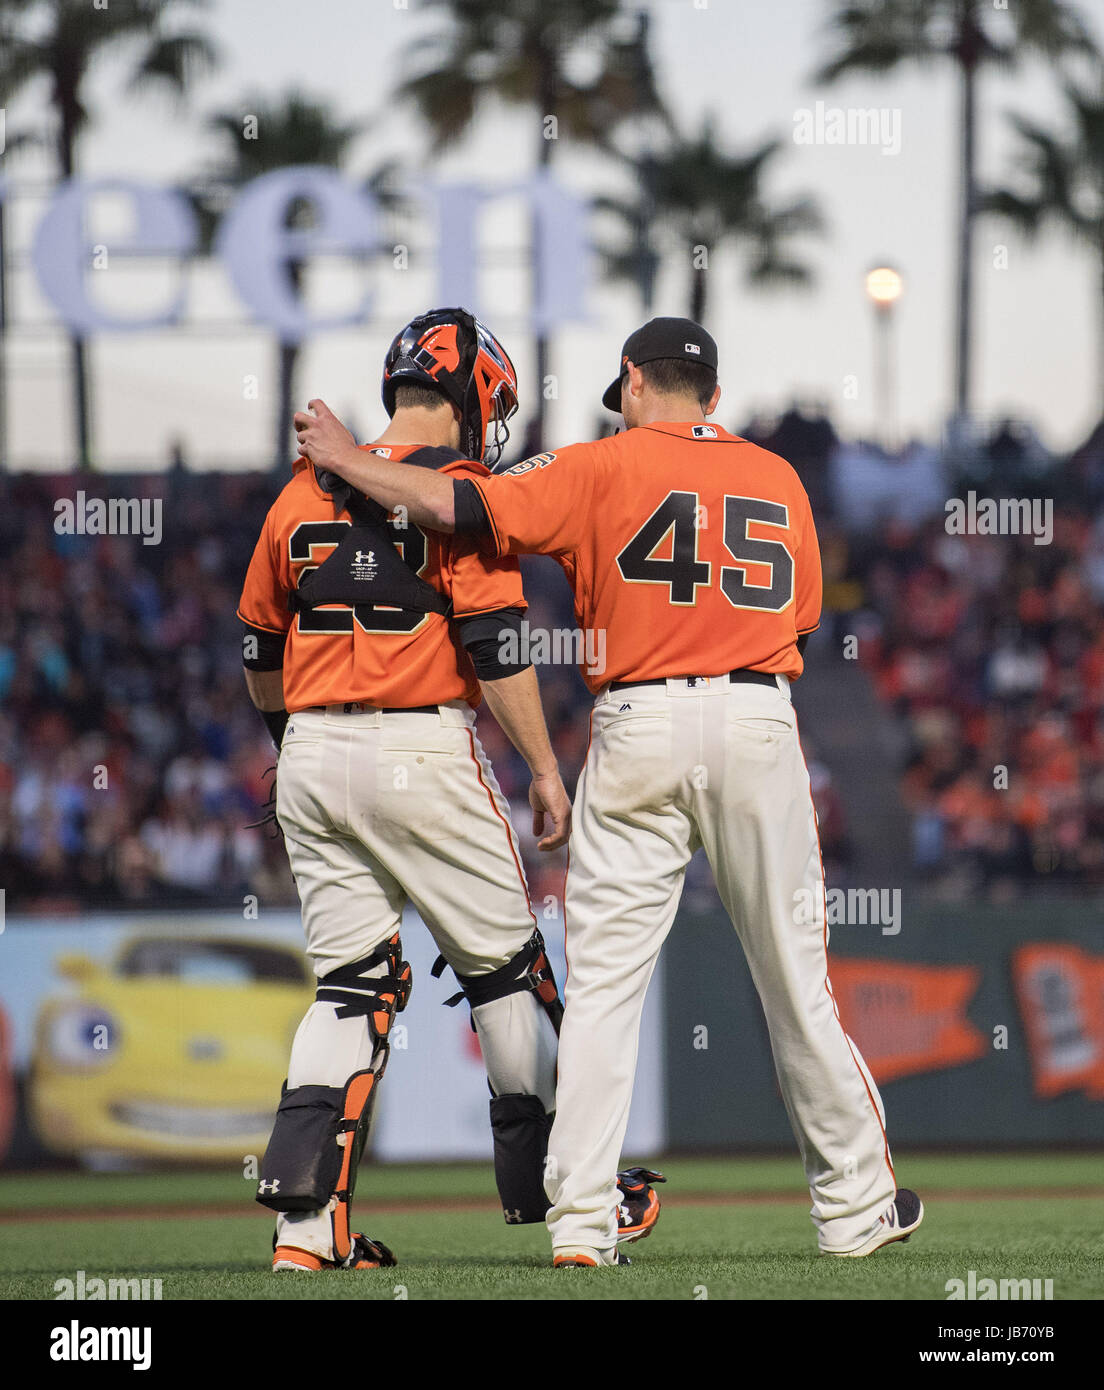 San Francisco, California, USA. 09th June, 2017. San Francisco Giants catcher Buster Posey (28) visits starting pitcher Matt Moore (45) on the mound in the fourth inning of a MLB baseball game between the Minnesota Twins and the San Francisco Giants on Portuguese Heritage Night at AT&T Park in San Francisco, California. Valerie Shoaps/CSM/Alamy Live News Stock Photo